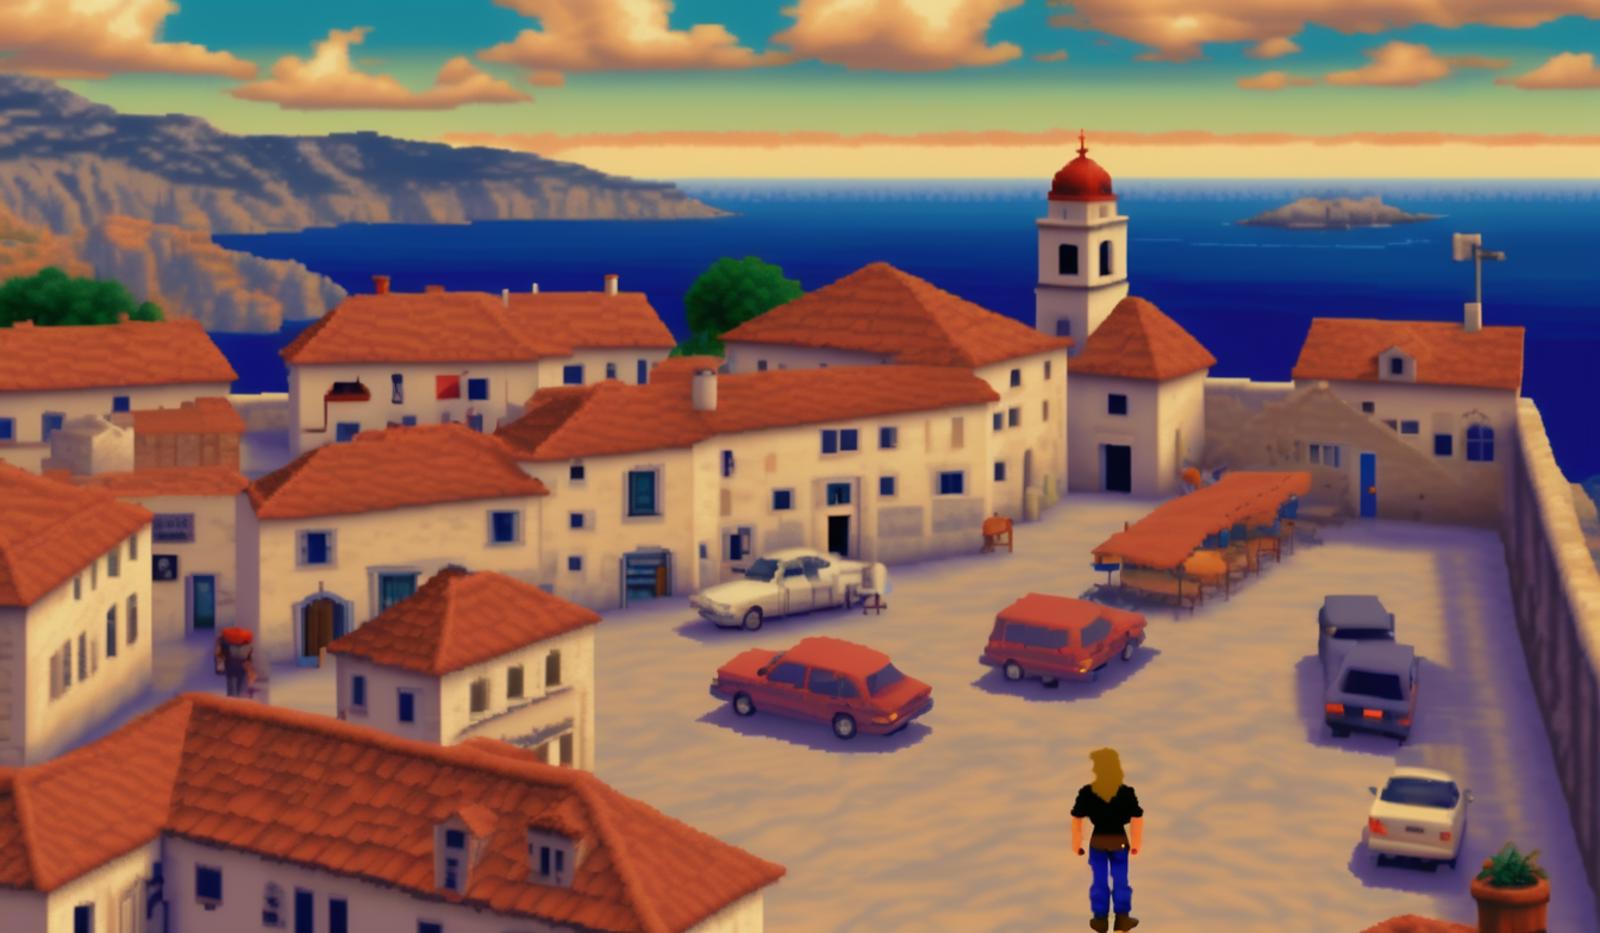 "LucasArts Style" (1990s PC Adventure Games) - SDXL LoRA - (Dreambooth Trained) image by DSlater